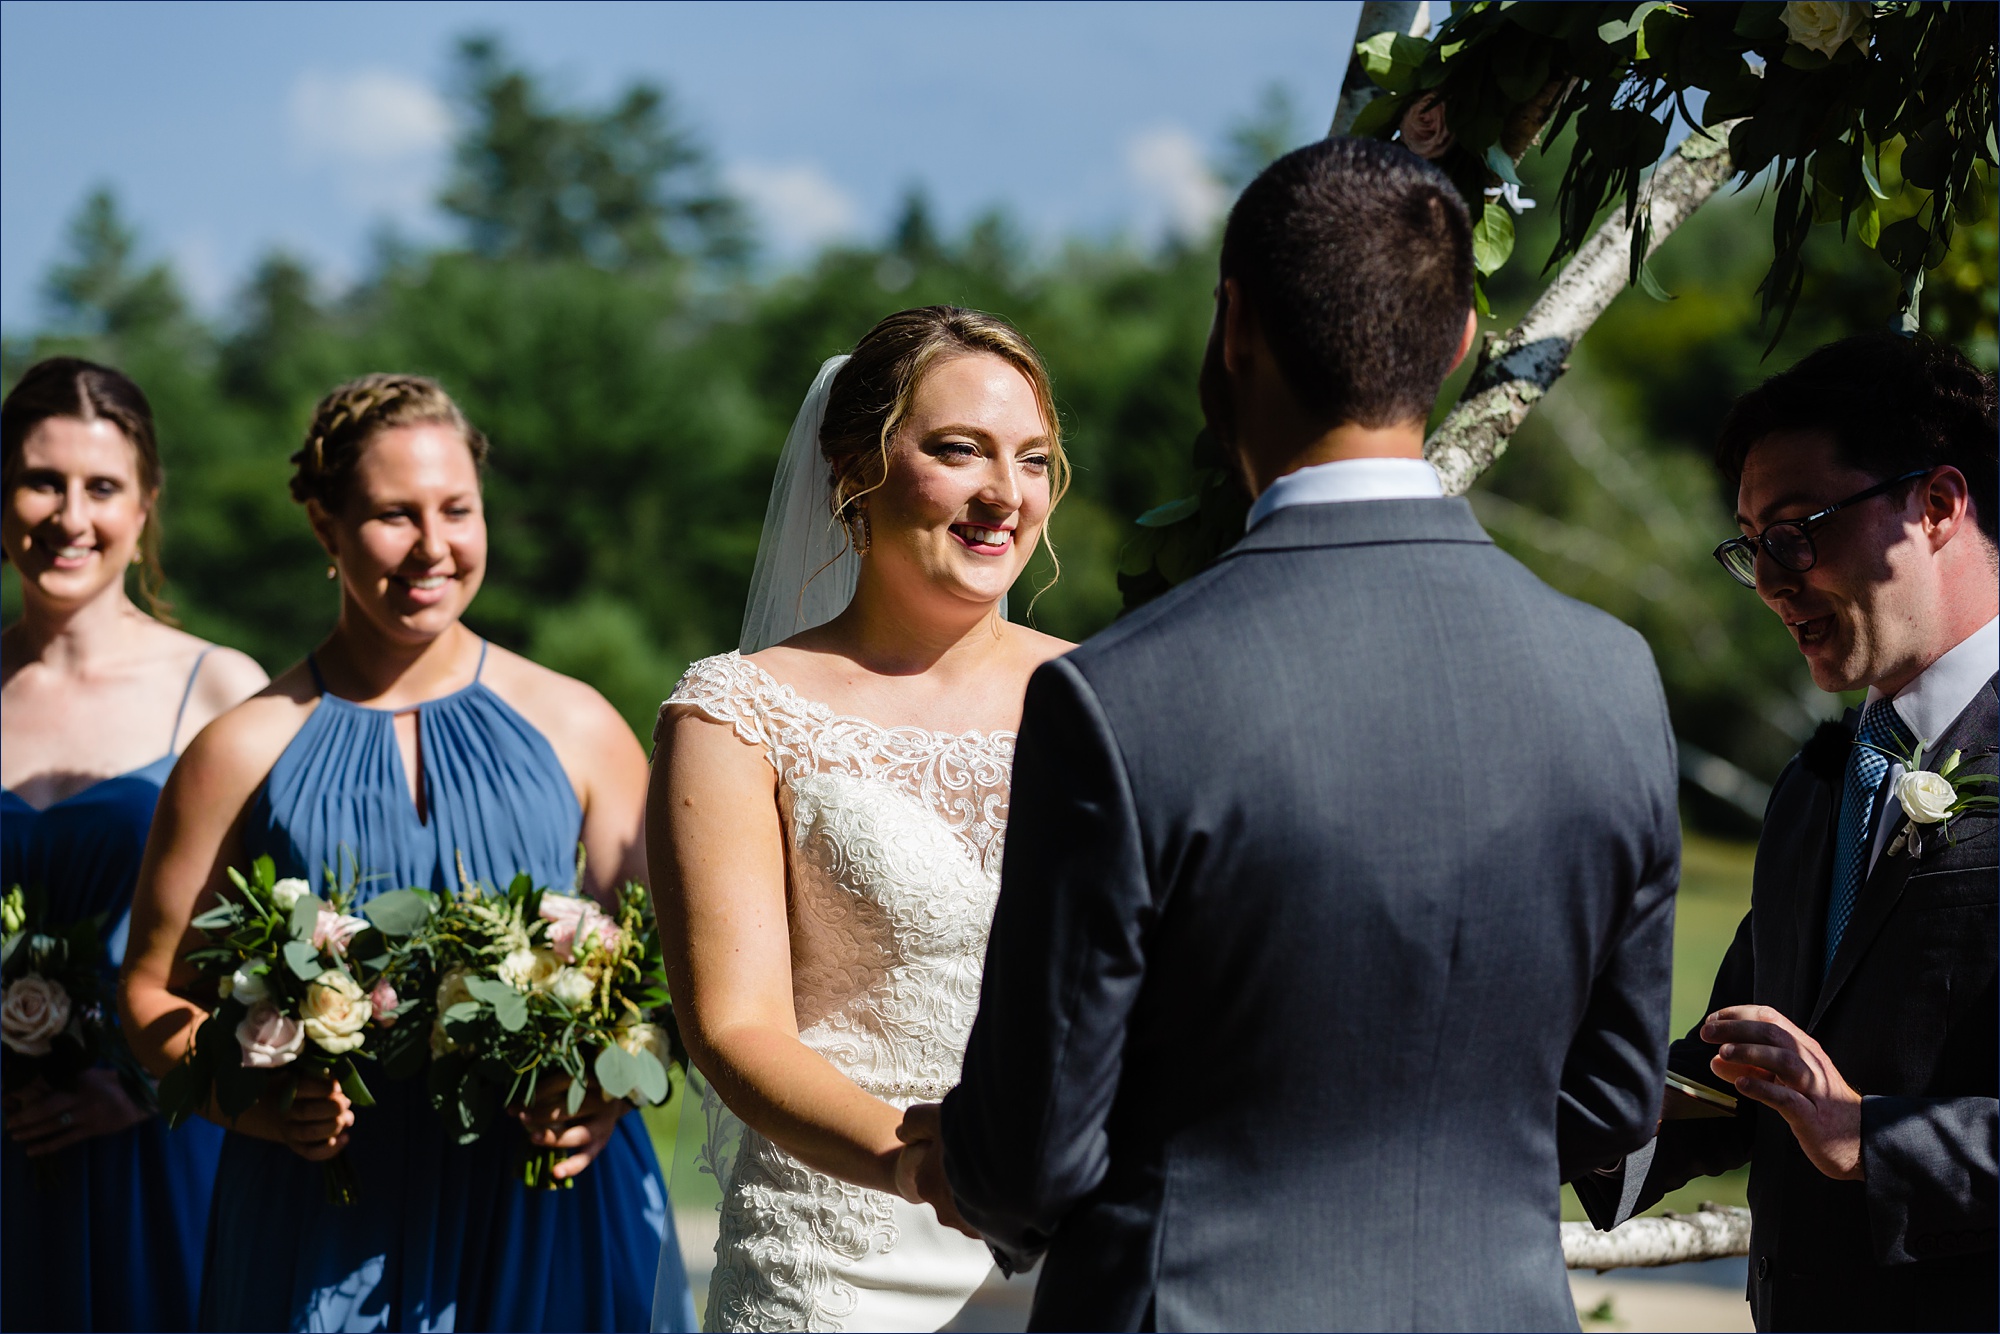 The bride smiles warmly at the groom during their ceremony on the front lawn in New Hampshire